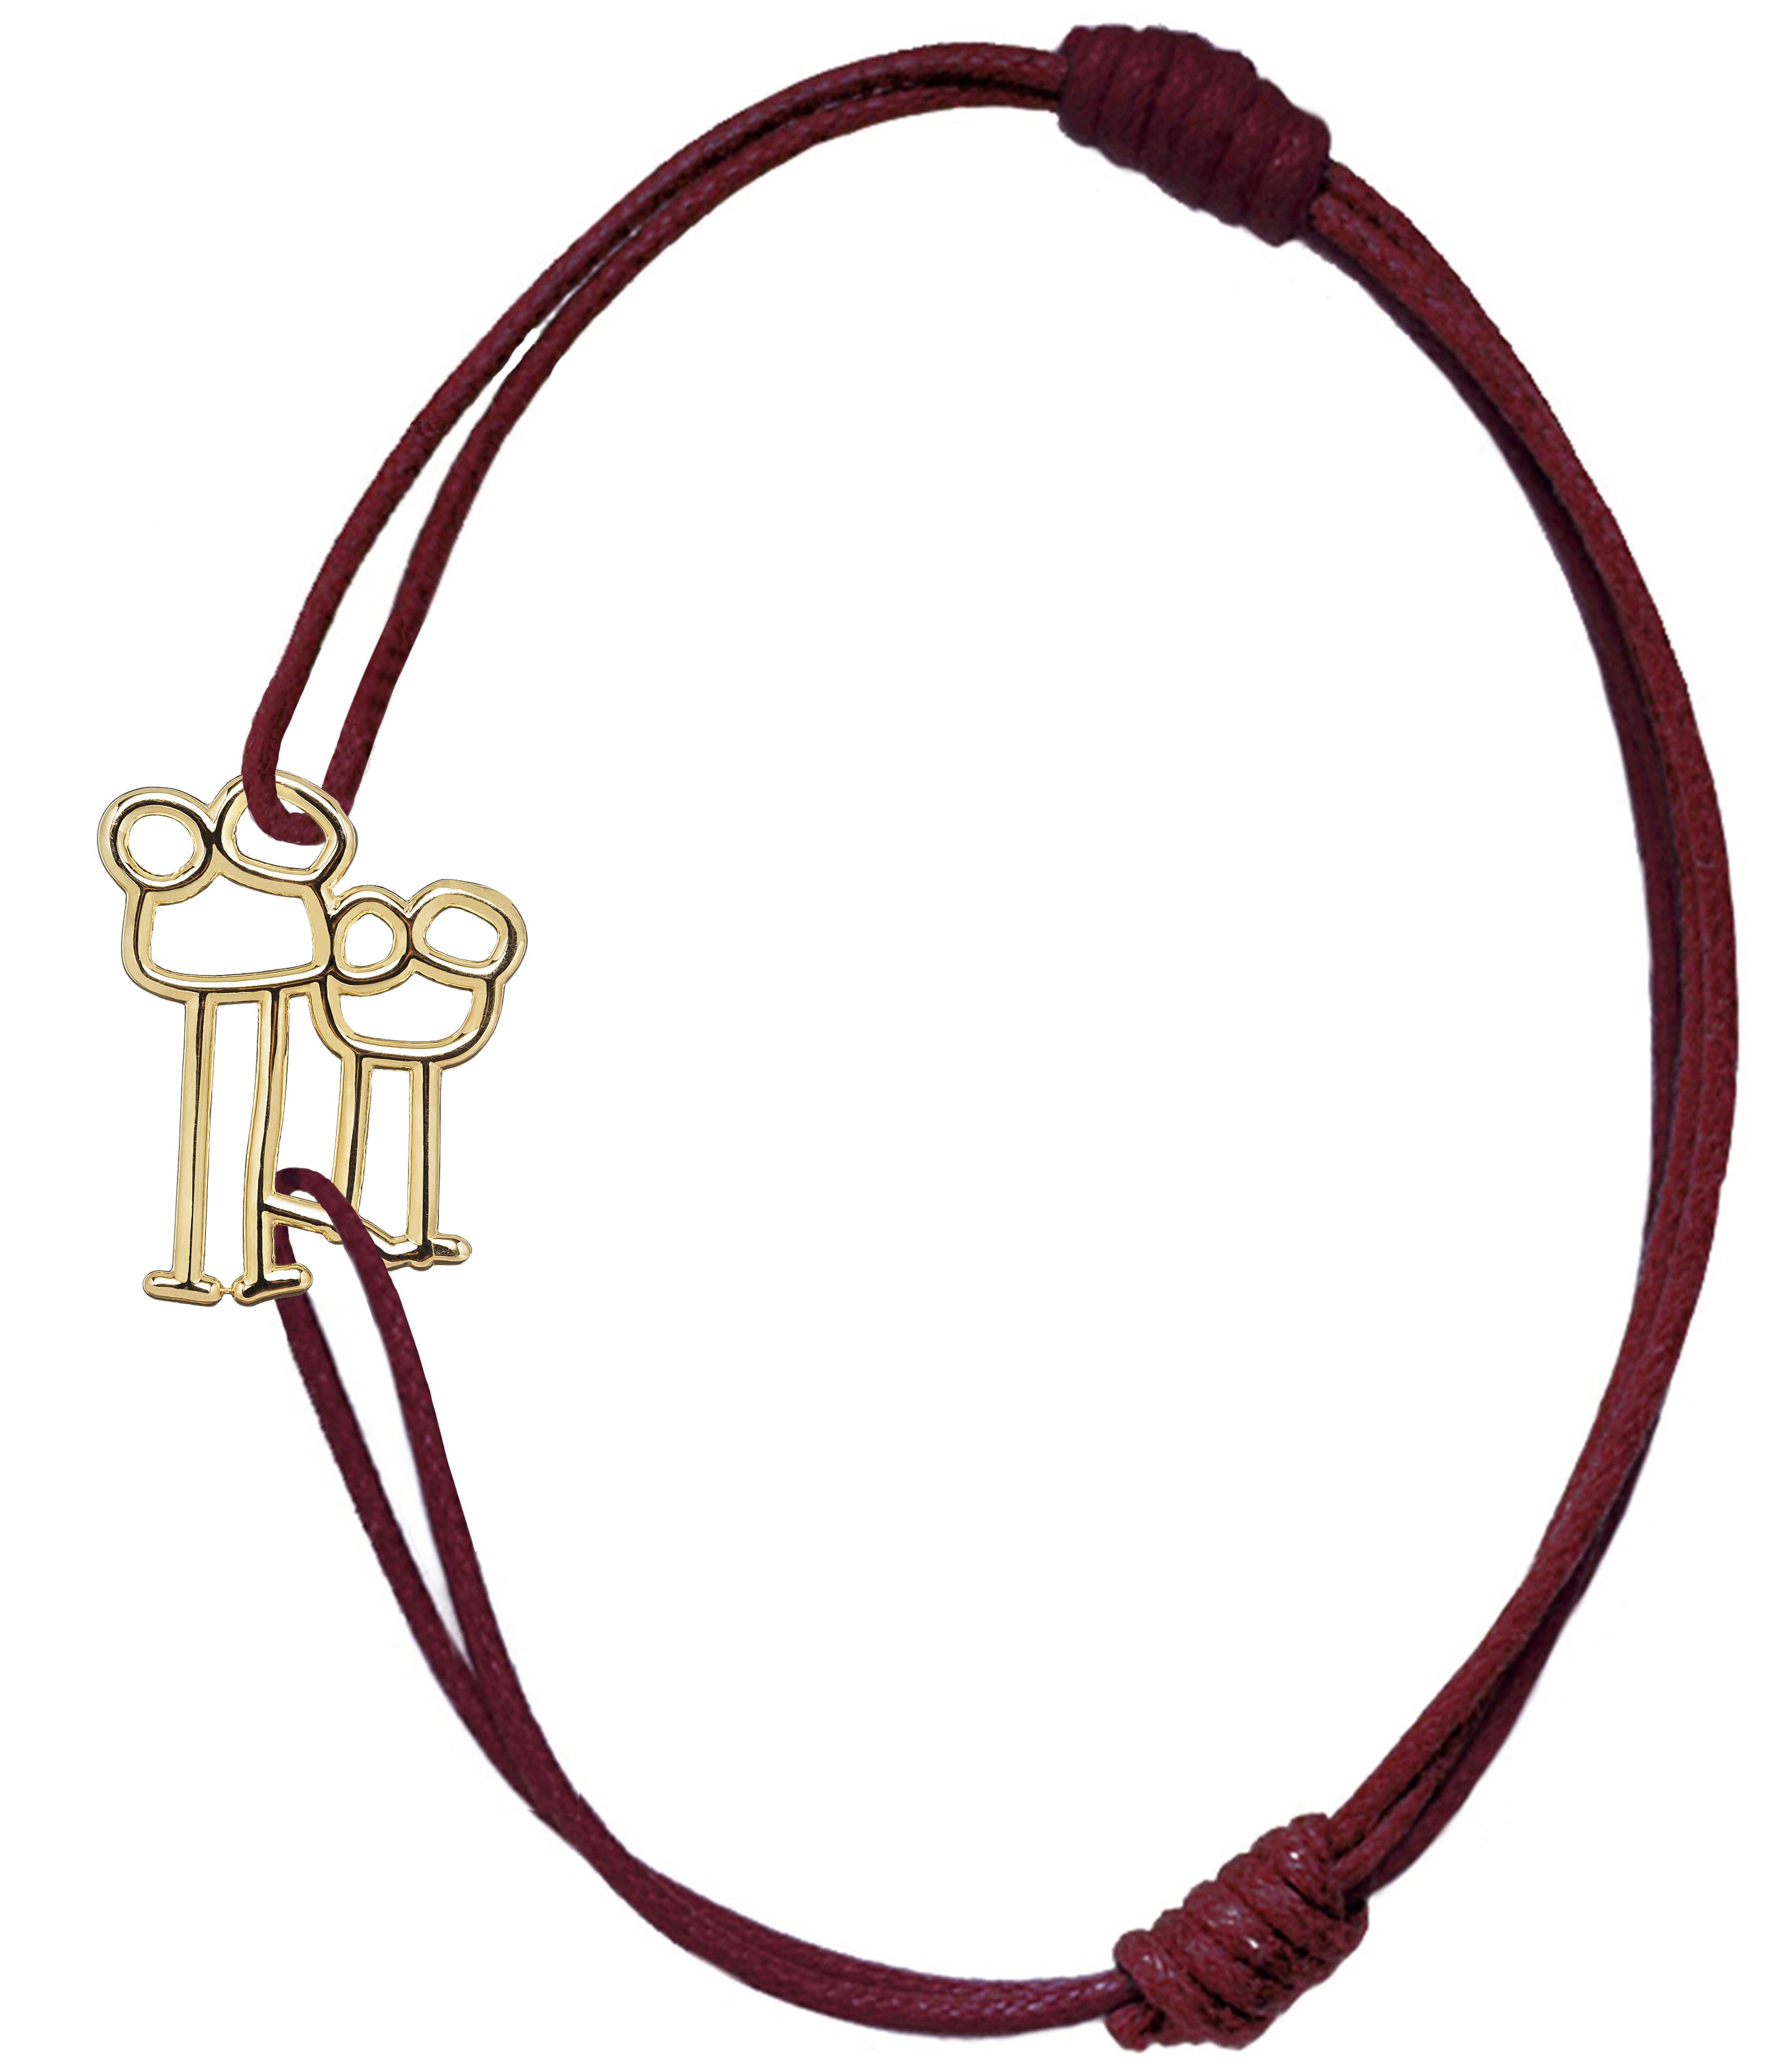 Burgundy cord bracelet with family shaped gold pendant